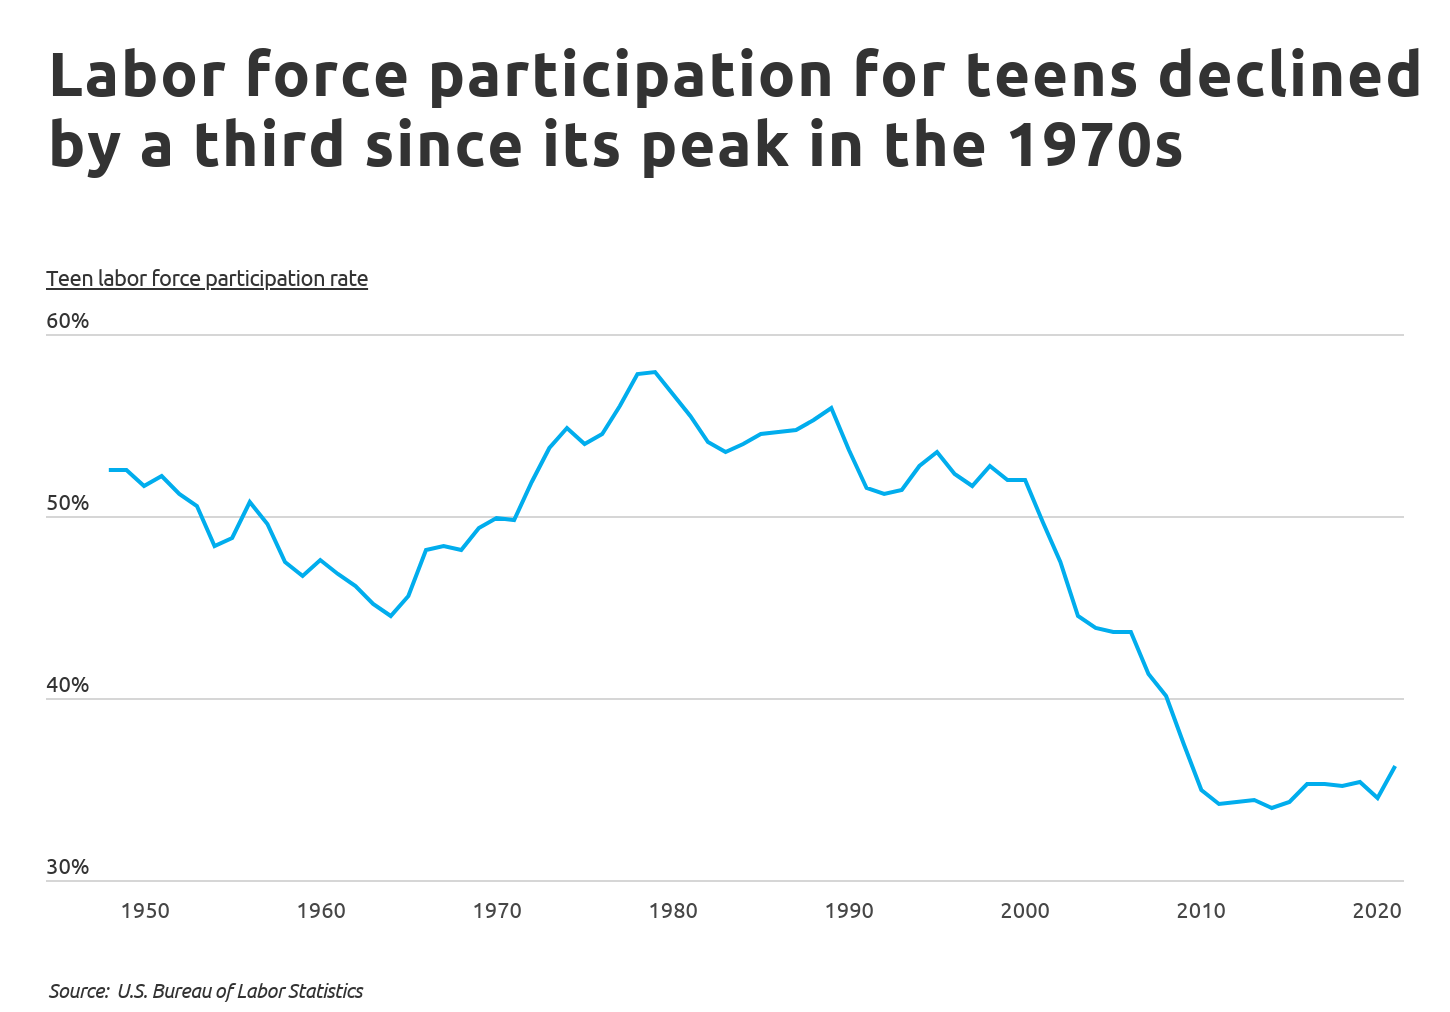  Labor force participation for teens declined since the 1970s